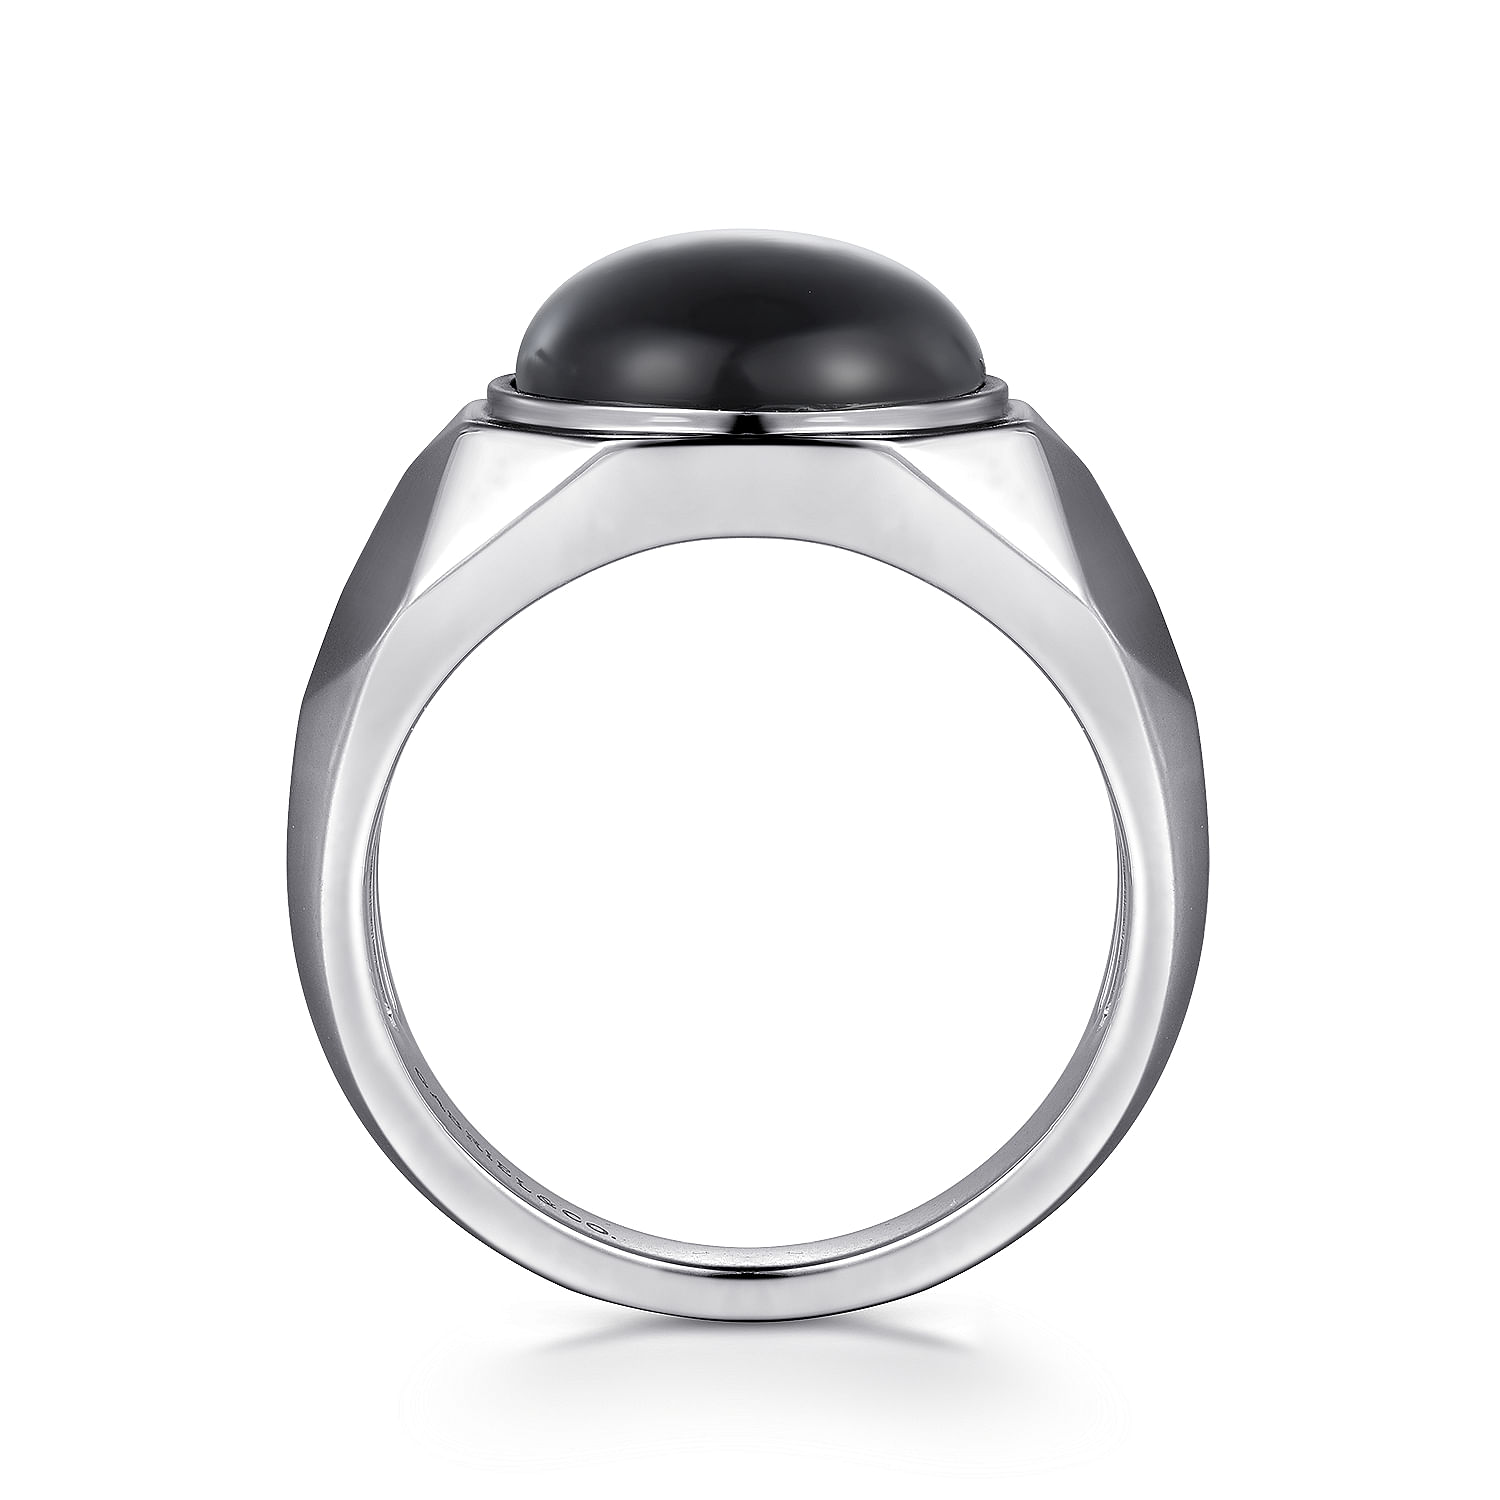 Wide 925 Sterling Silver Signet Ring with Black Onyx in High Polished Finish